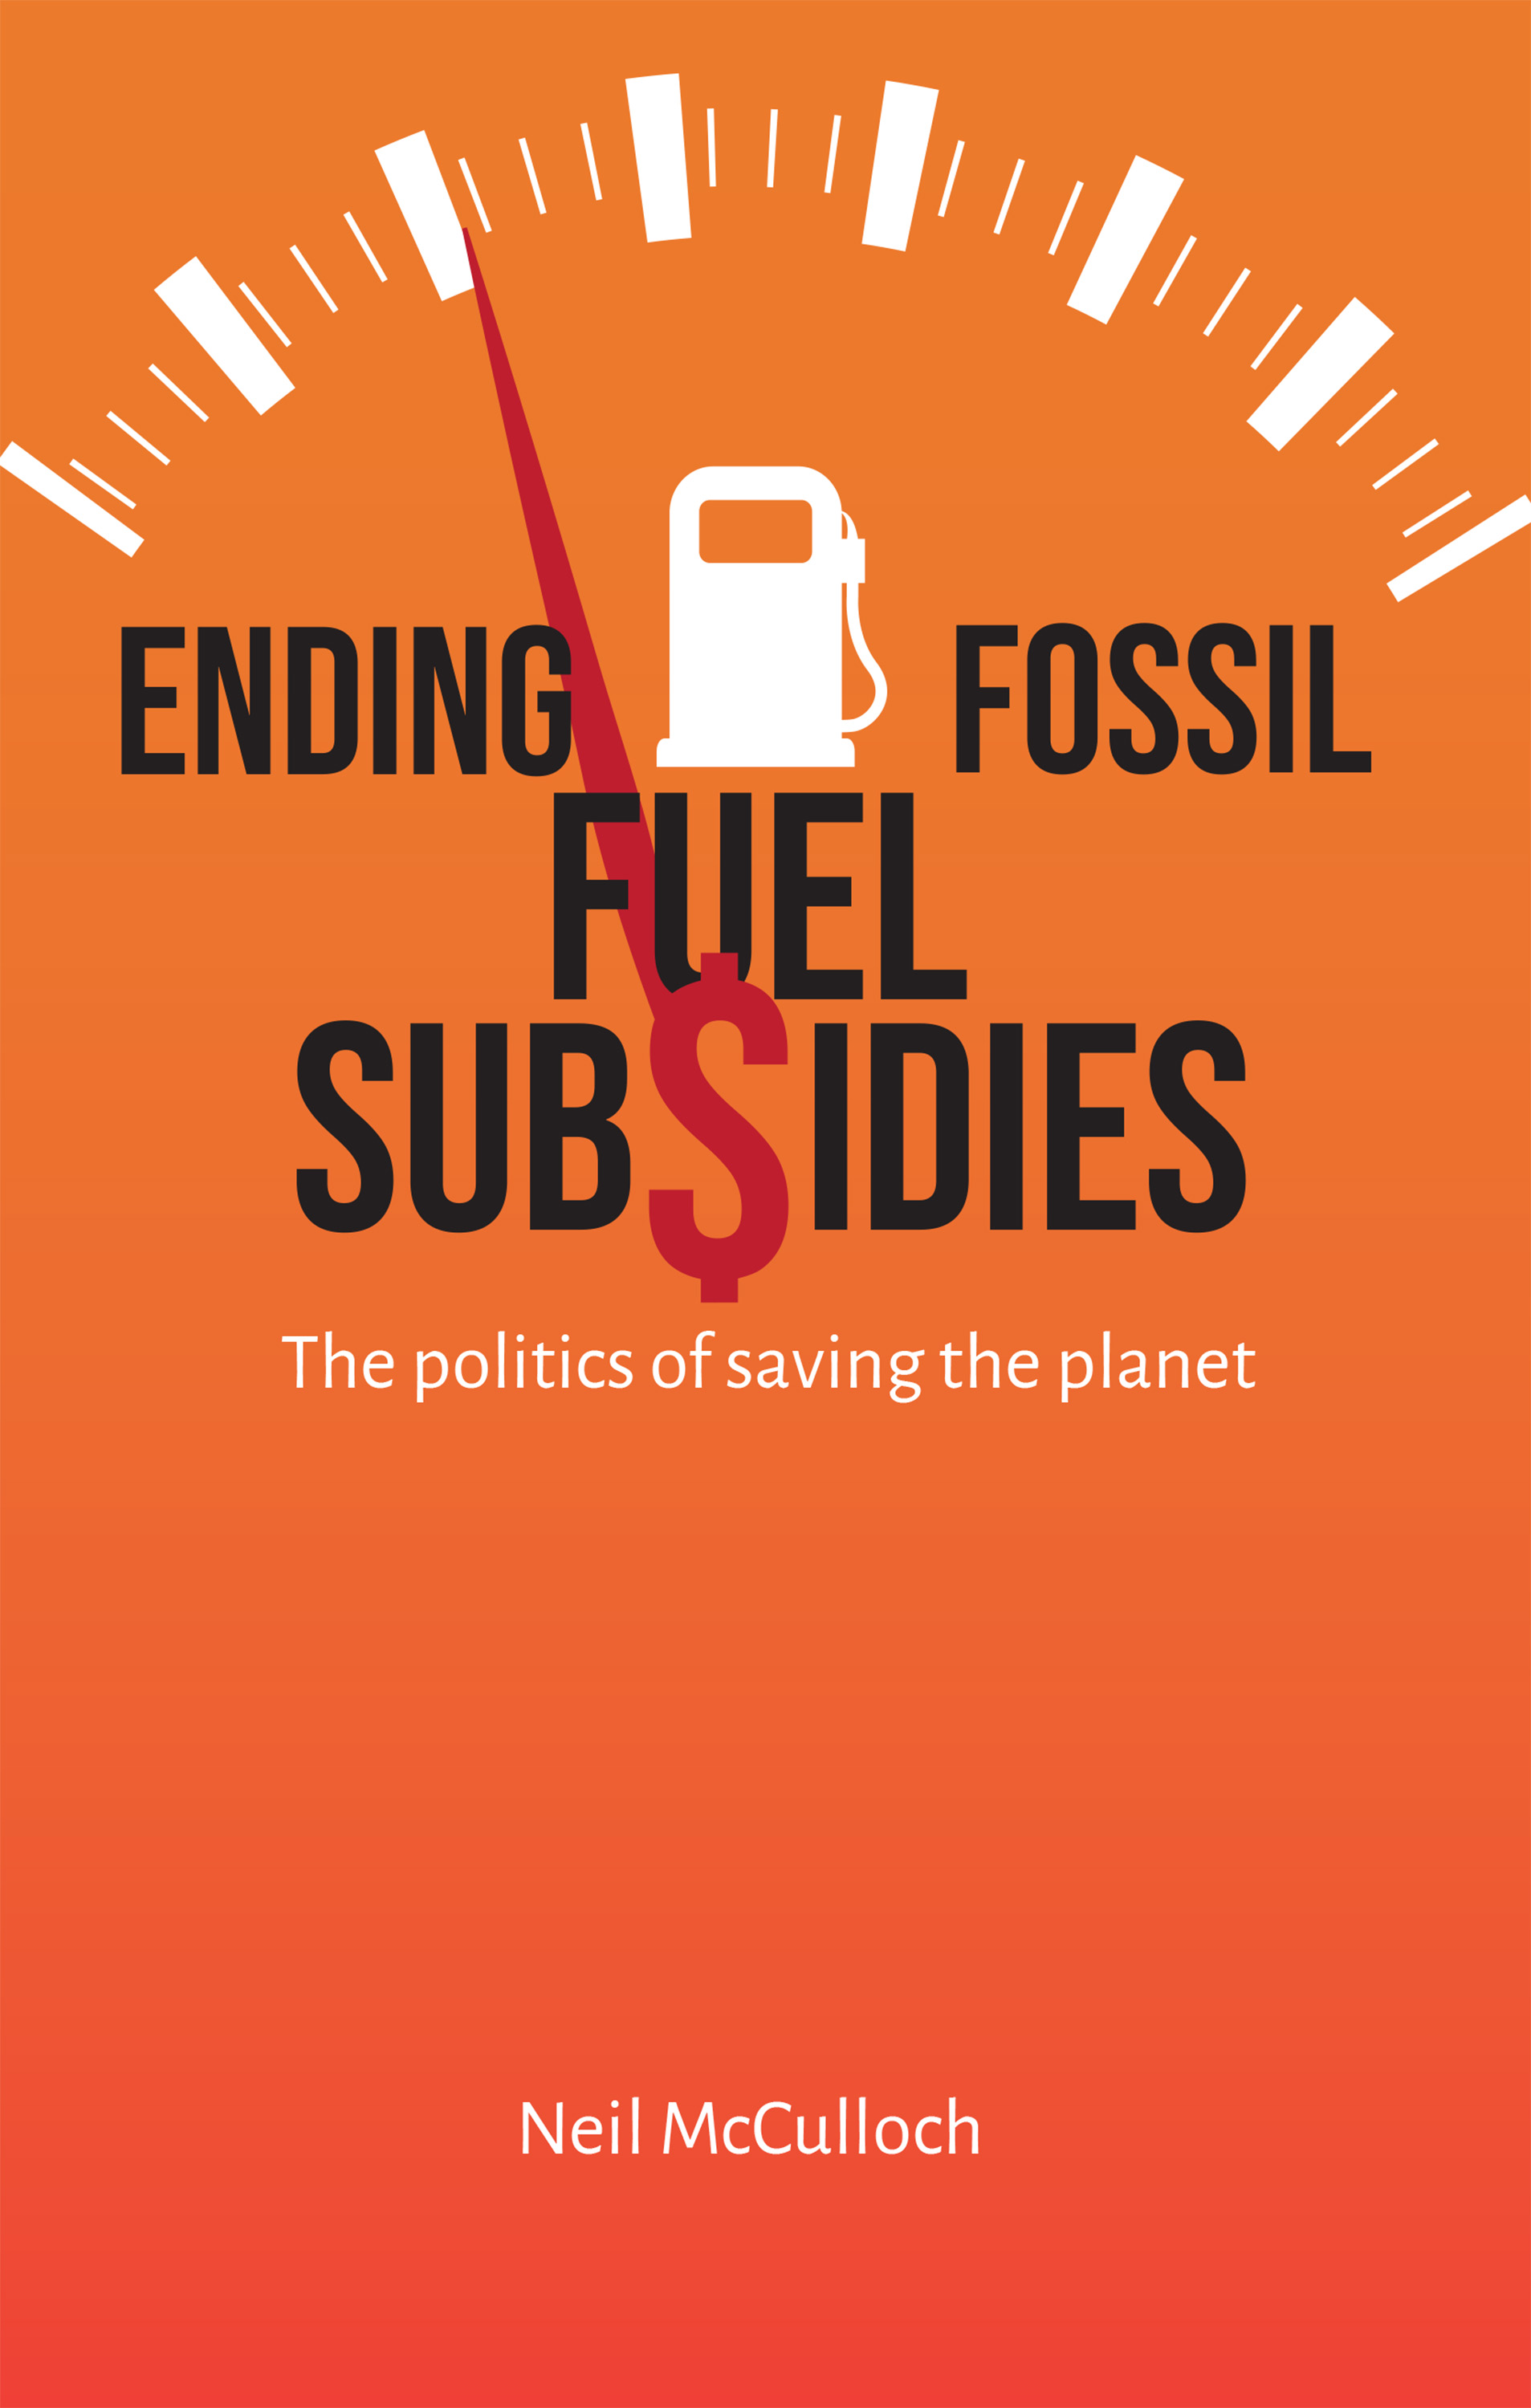 Ending Fossil Fuel Subsidies: the politics of saving the planet - Dr. Neil McCulloch